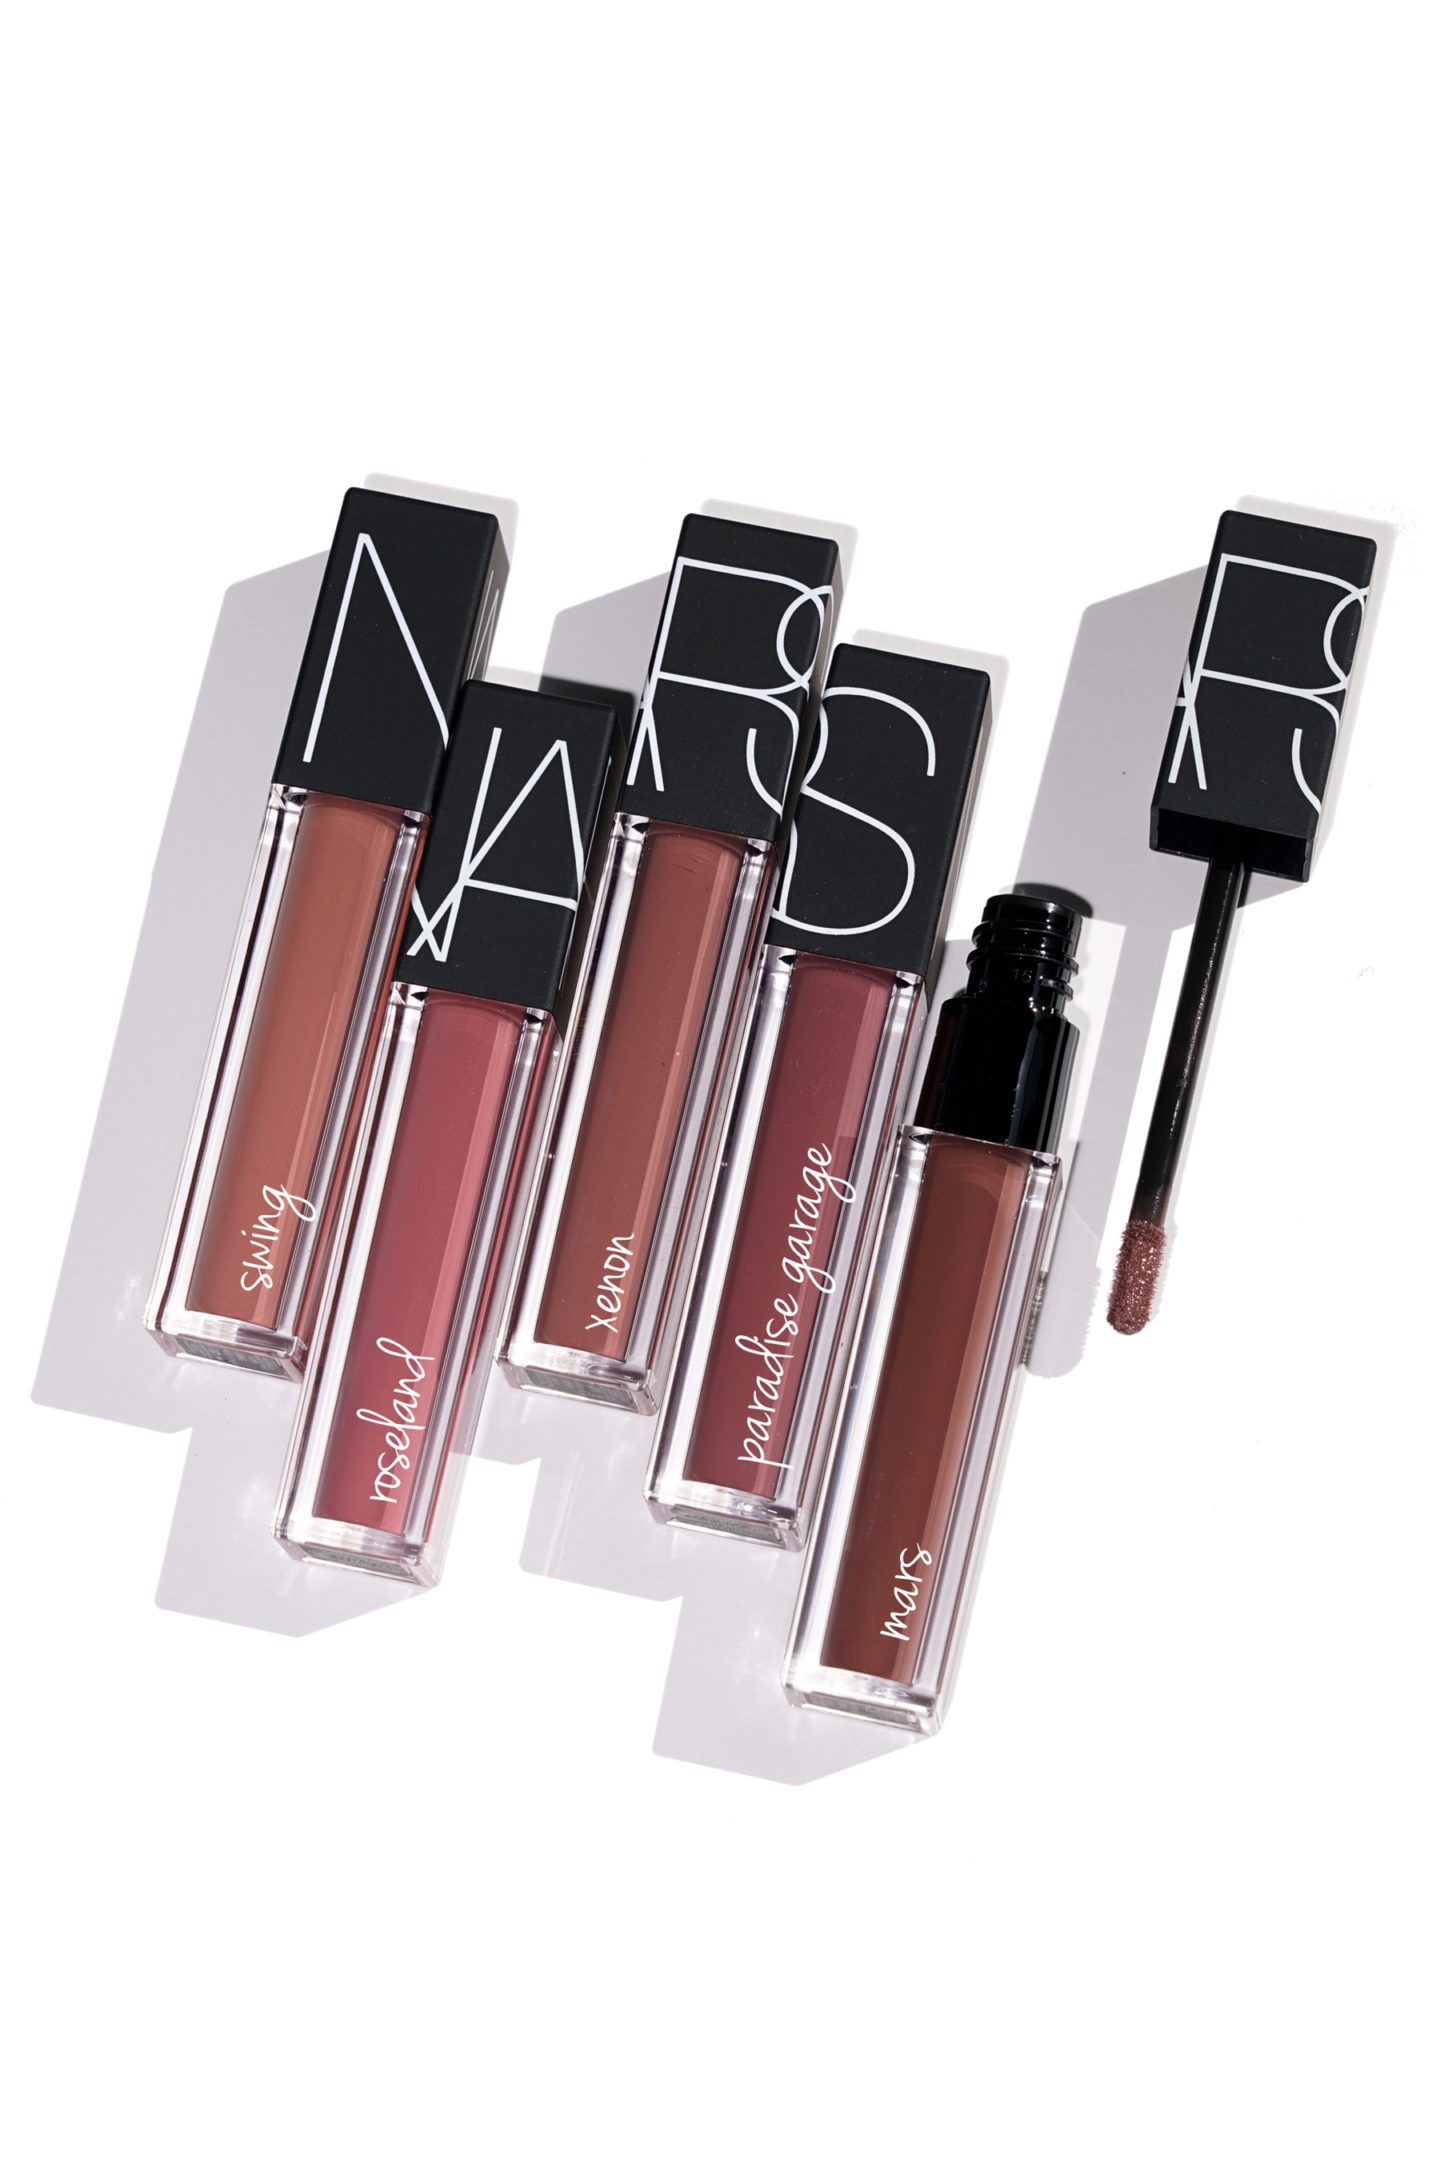 NARS Velvet Lip Glide New Shades Swing, Roseland, Xenon, Paradise Garage and Mars review via The Beauty Look Book